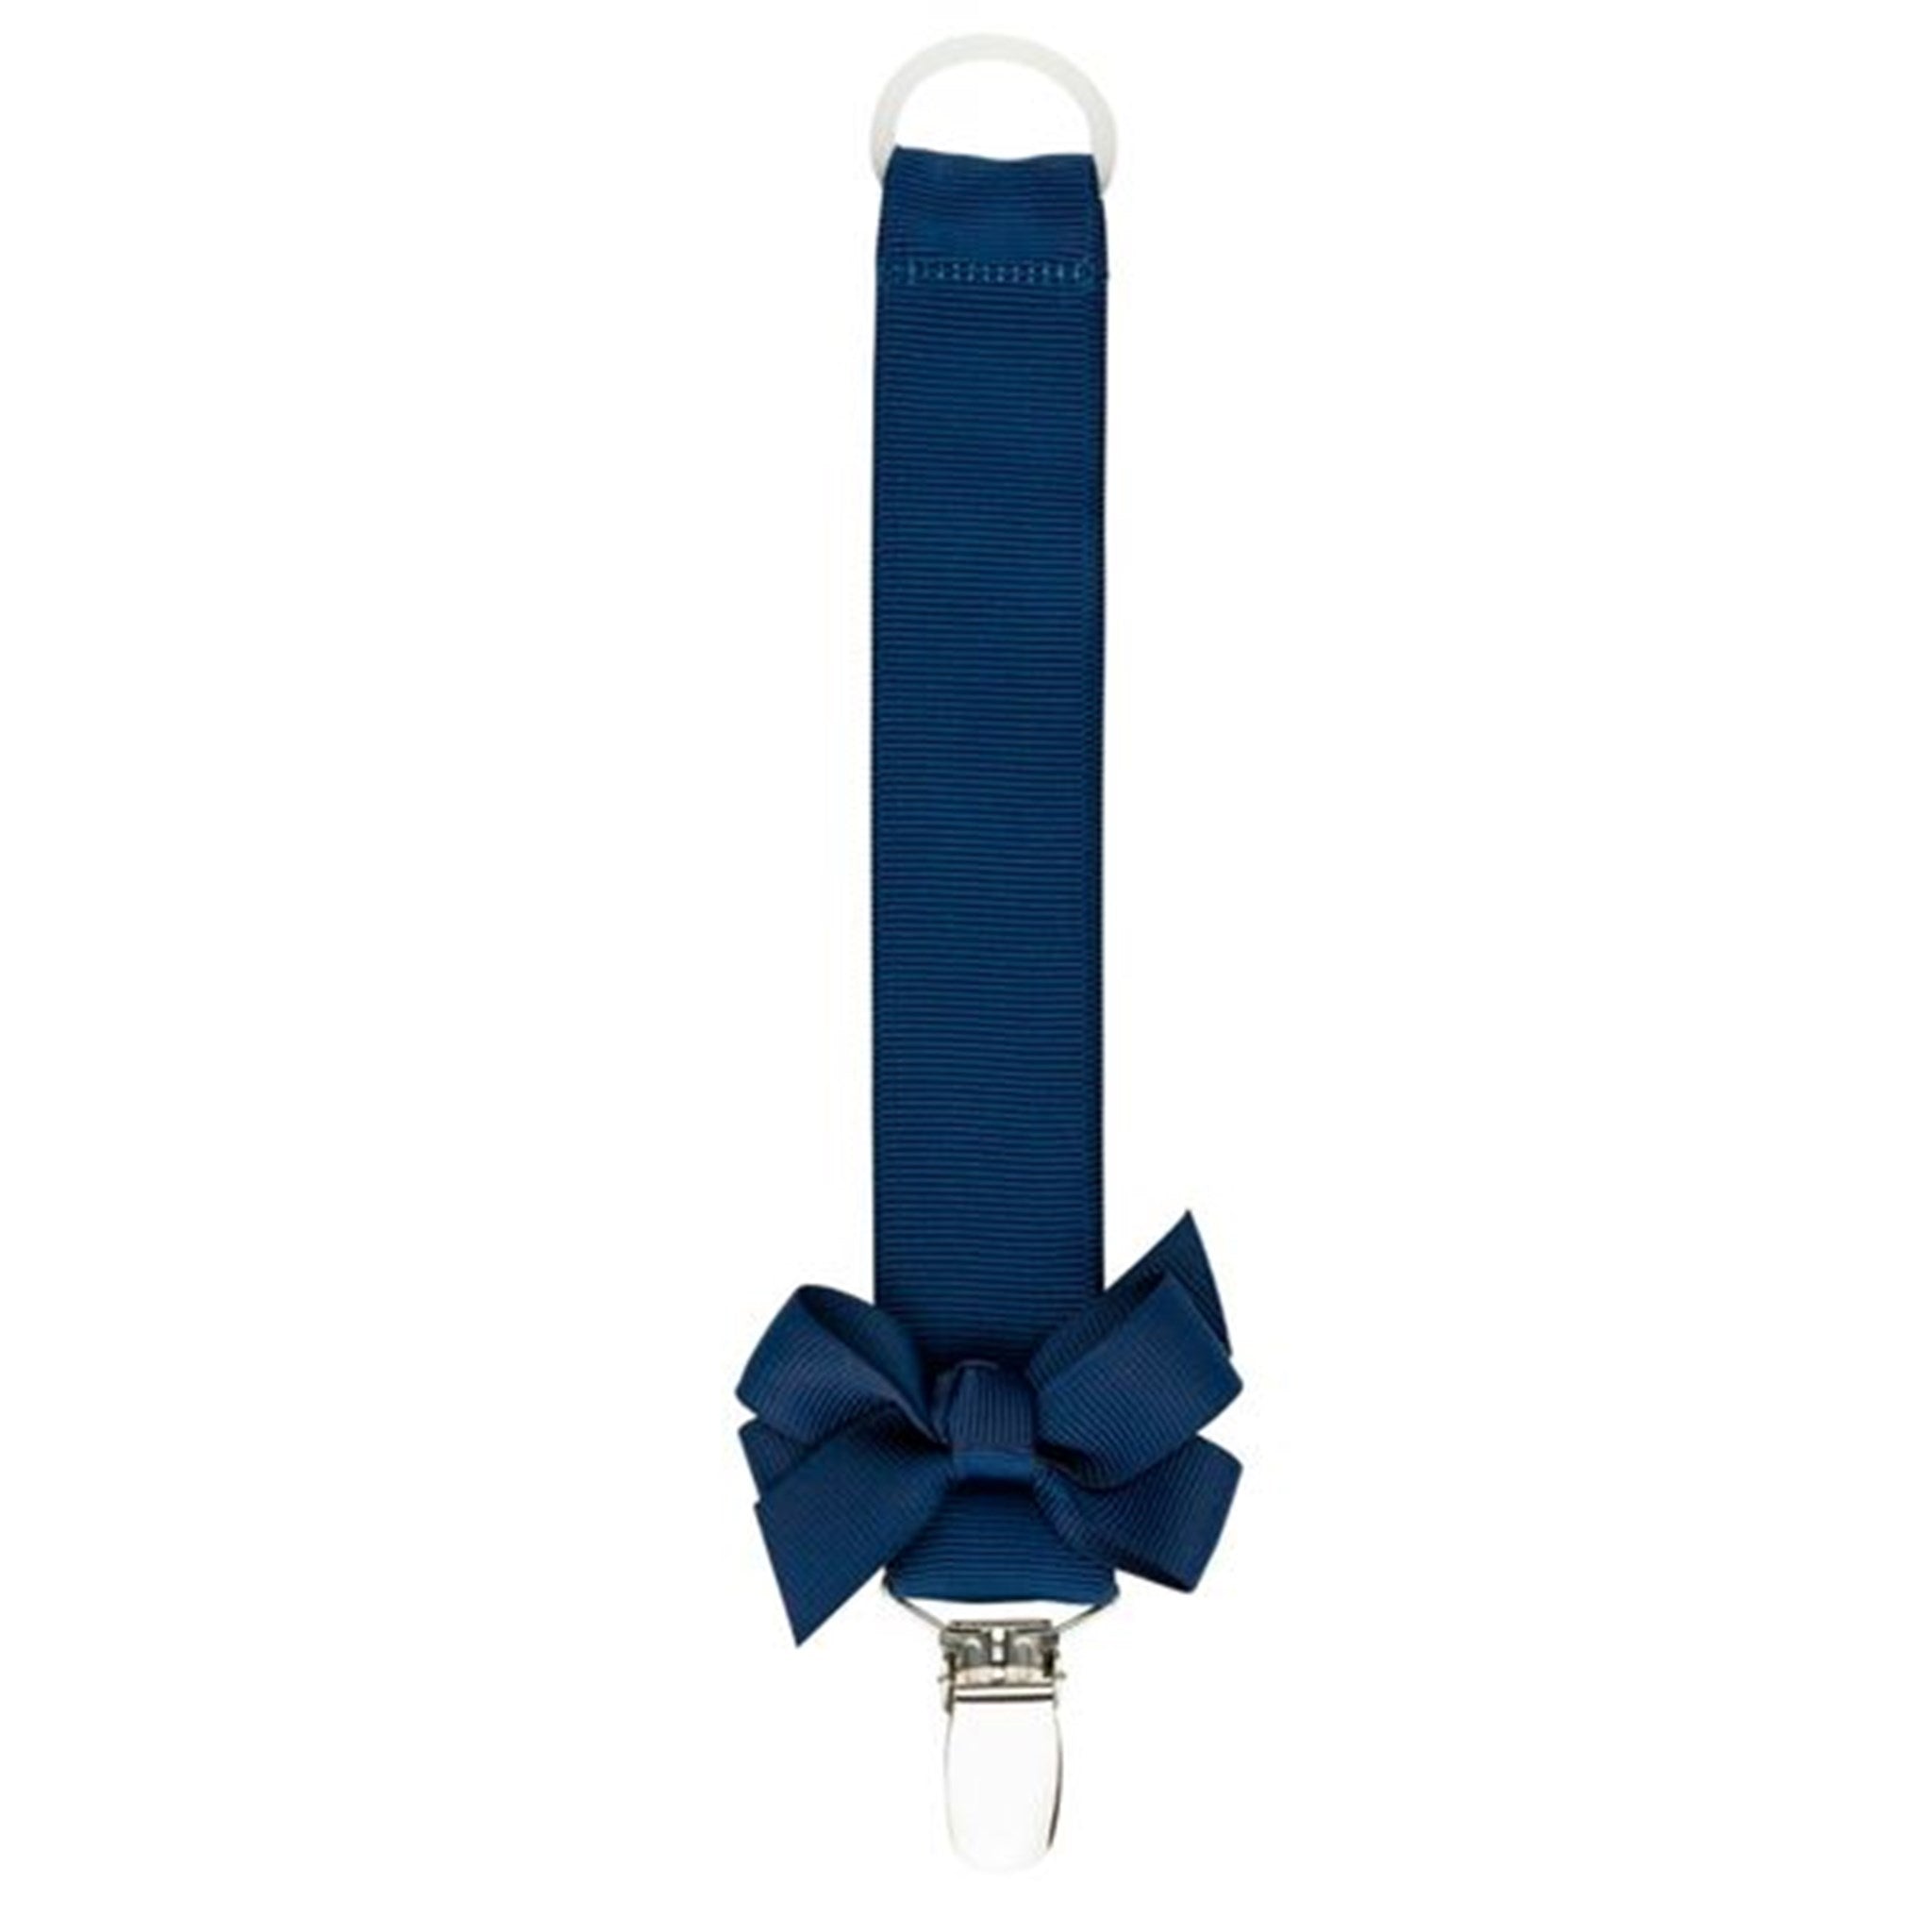 Bow's by Stær Pacifier Holder (navy)